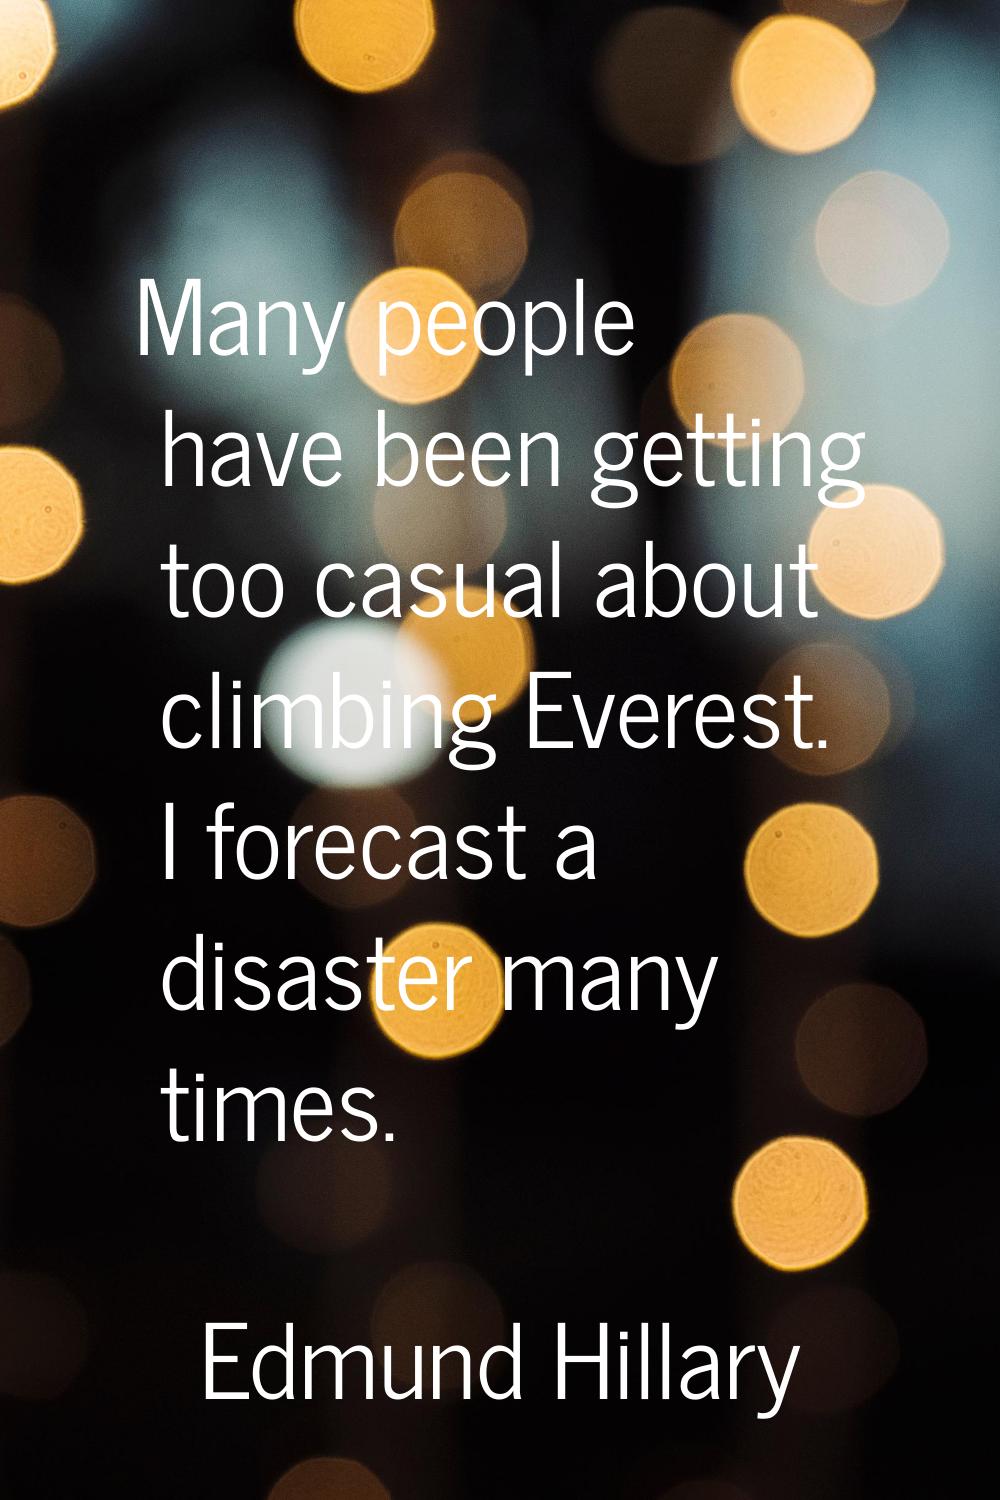 Many people have been getting too casual about climbing Everest. I forecast a disaster many times.